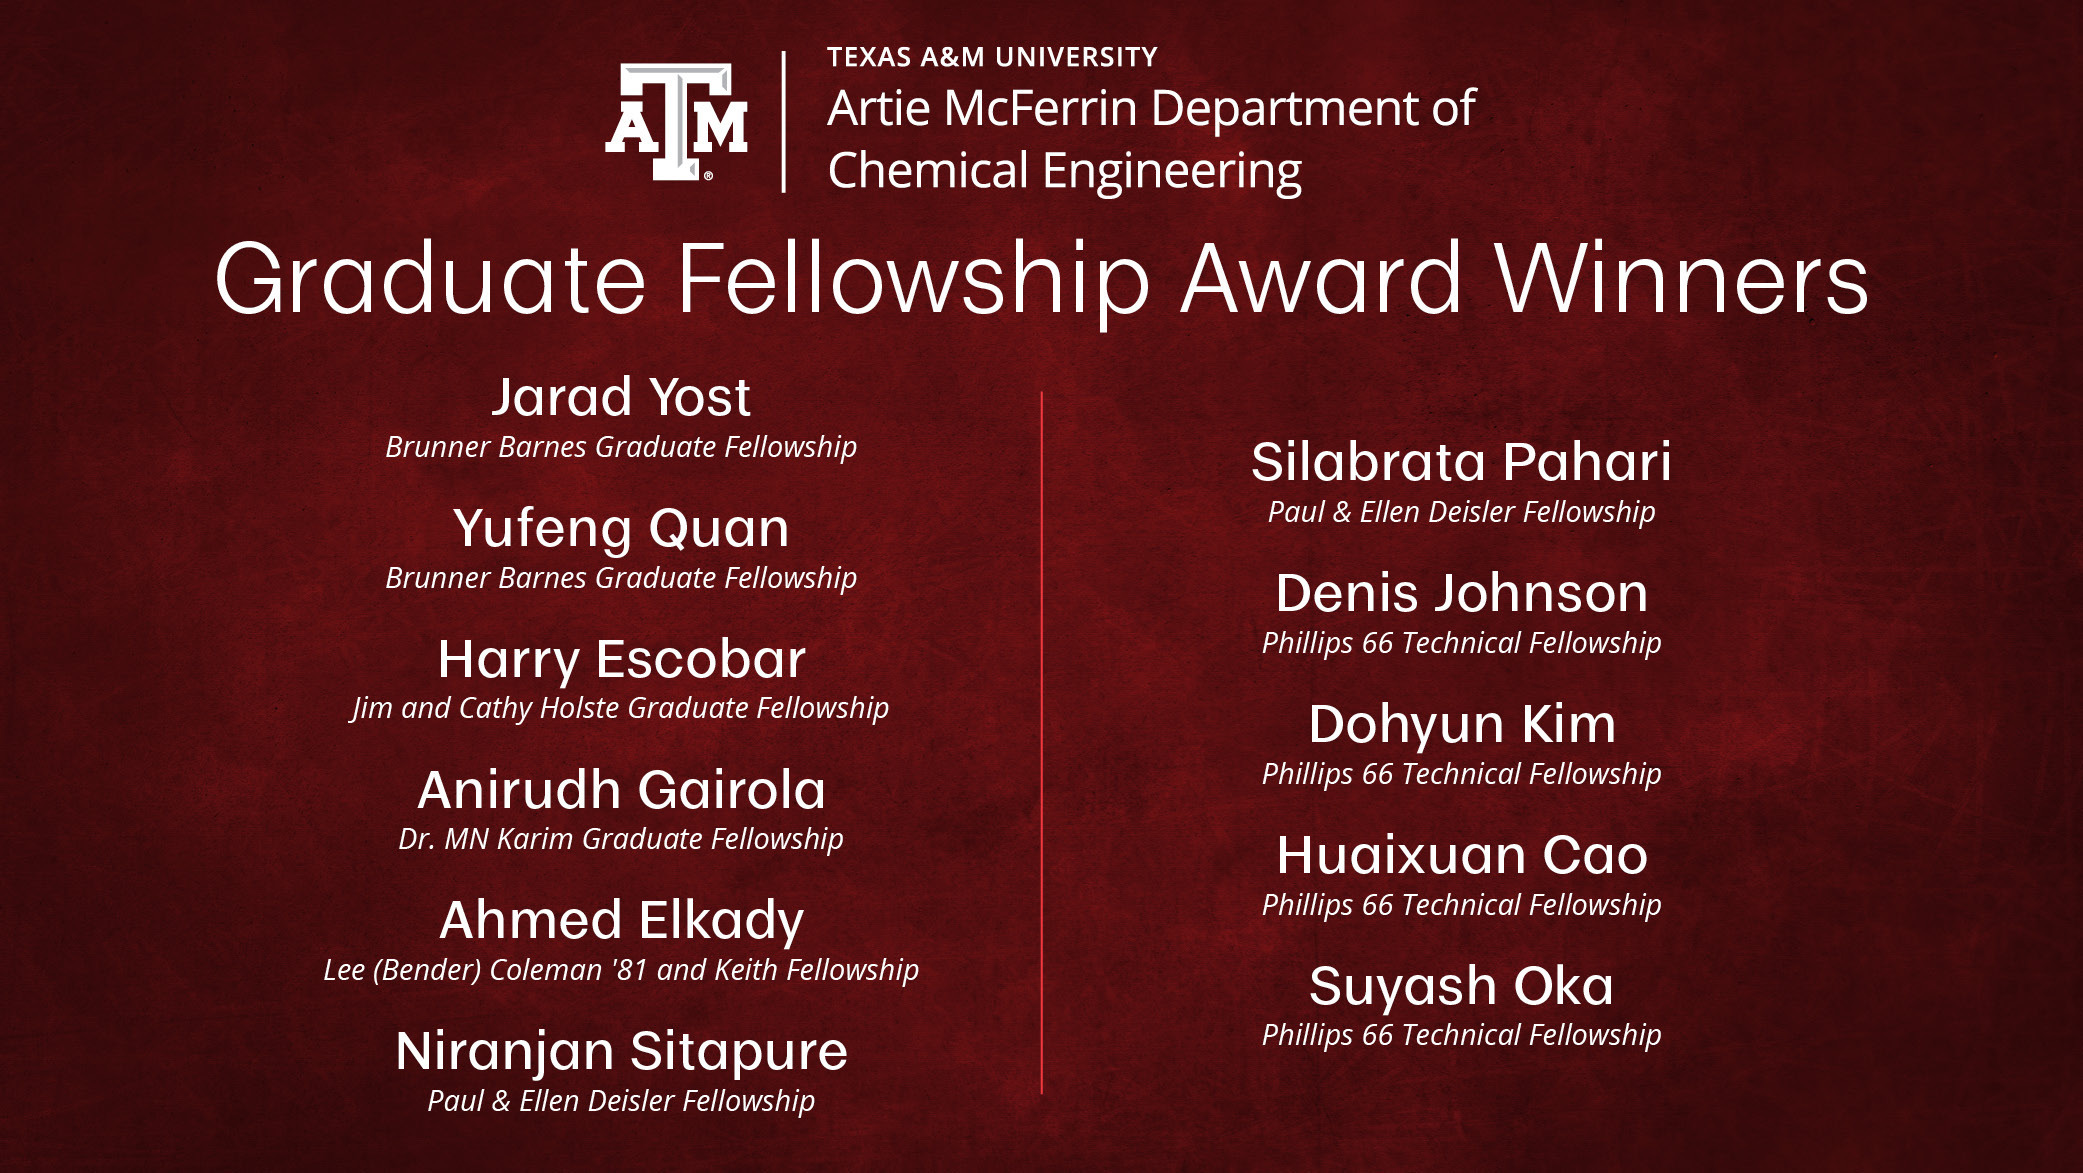 List of names included in the fellowship saying “Graduate Fellowship Award Winners.” Names include Jarad Yost and Yufeng Quan for the Brunner Barns Graduate Fellowship; Harry Escobar for the Jim and Cathy Holste Graduate Fellowship; Anirudh Gairola for the Dr. MN Karim Graduate Fellowship; Ahmed Elkady for the Lee (Bender) Coleman ’81 and Keith Fellowship; Niranjan Sitapure and Silabrata Pahari for the Paul & Ellen Deisler Fellowship; and Denis Johnson, Dohyun Kim, Huaixuan Cao and Suyash Oka for the Phillips 66 Technical Fellowship.